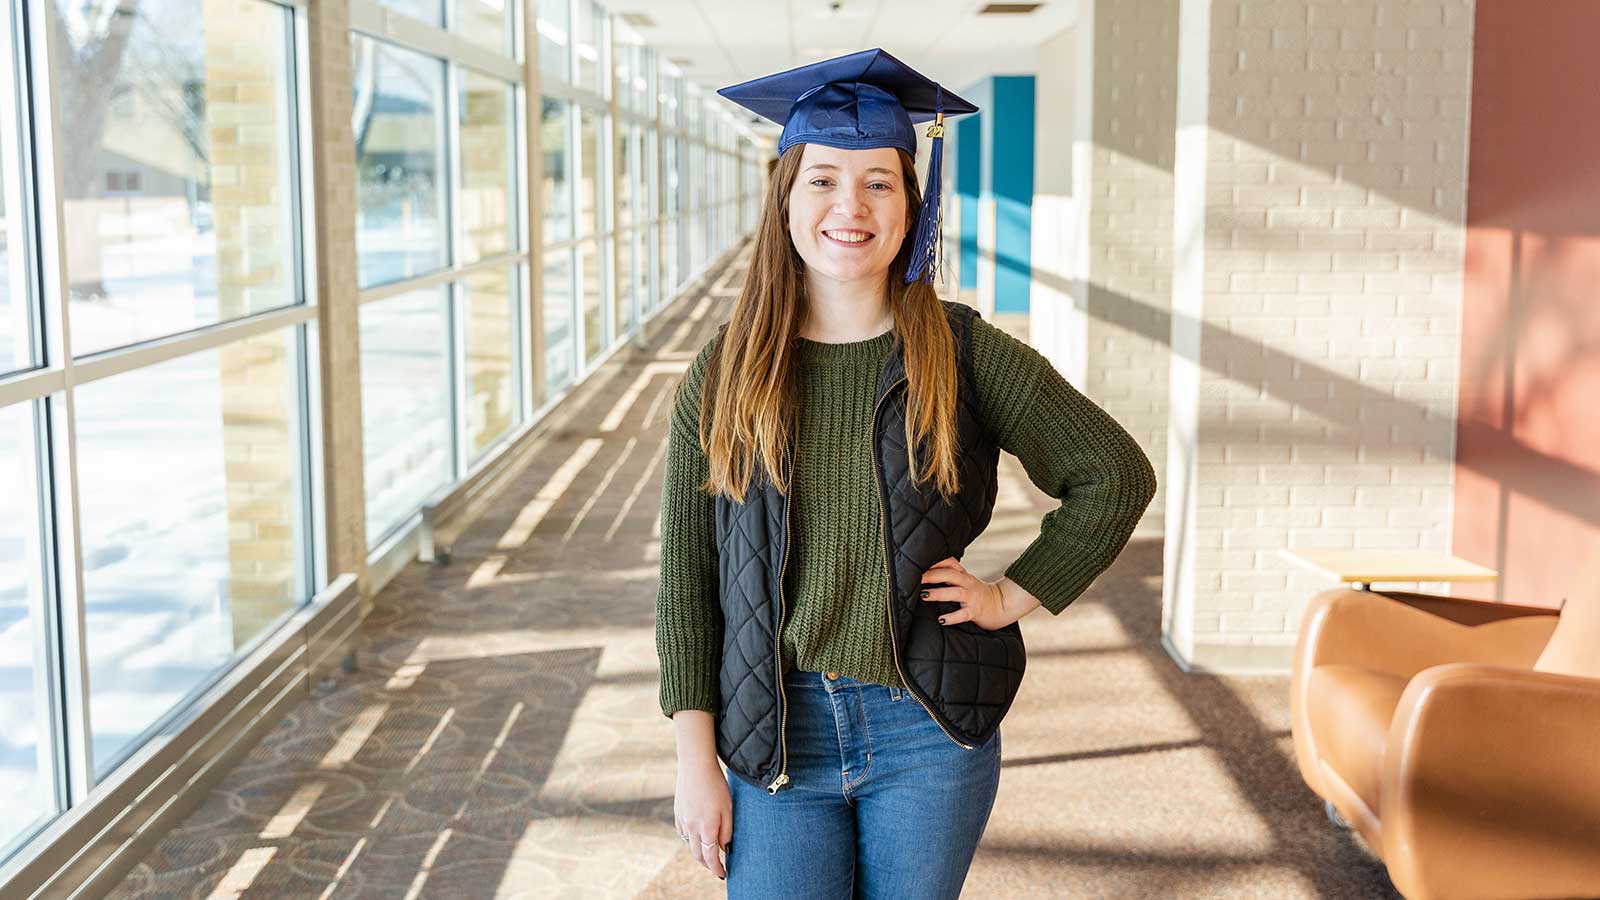 Samantha posing while wearing an NTC graduation cap in the hallway.